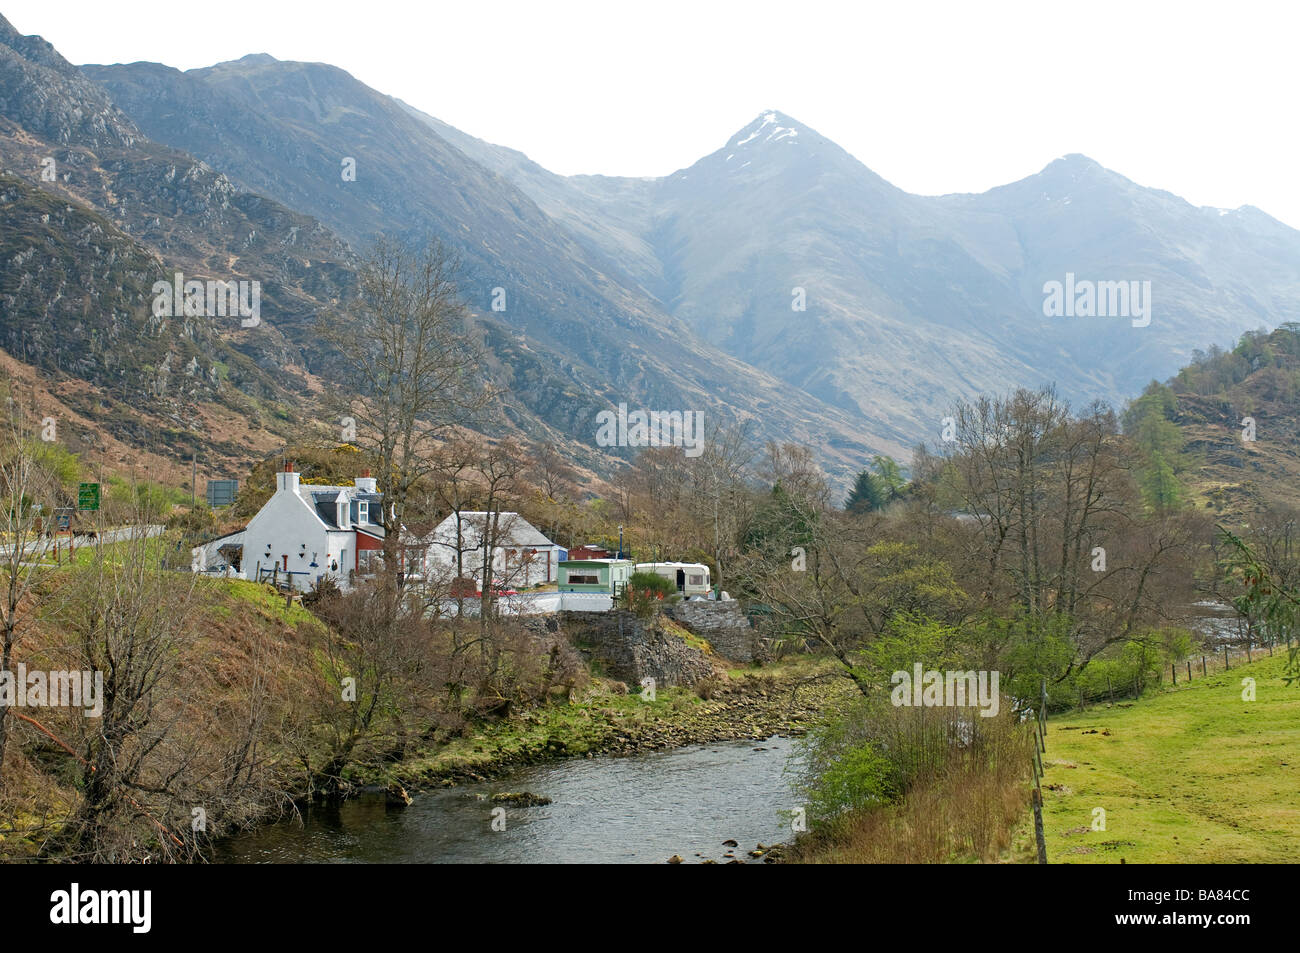 The small quiet hamlet of Shiel bridge Ross-shire overlooked by the 7 sisters of Kintail Scottish Highlands.    SCO 2358 Stock Photo